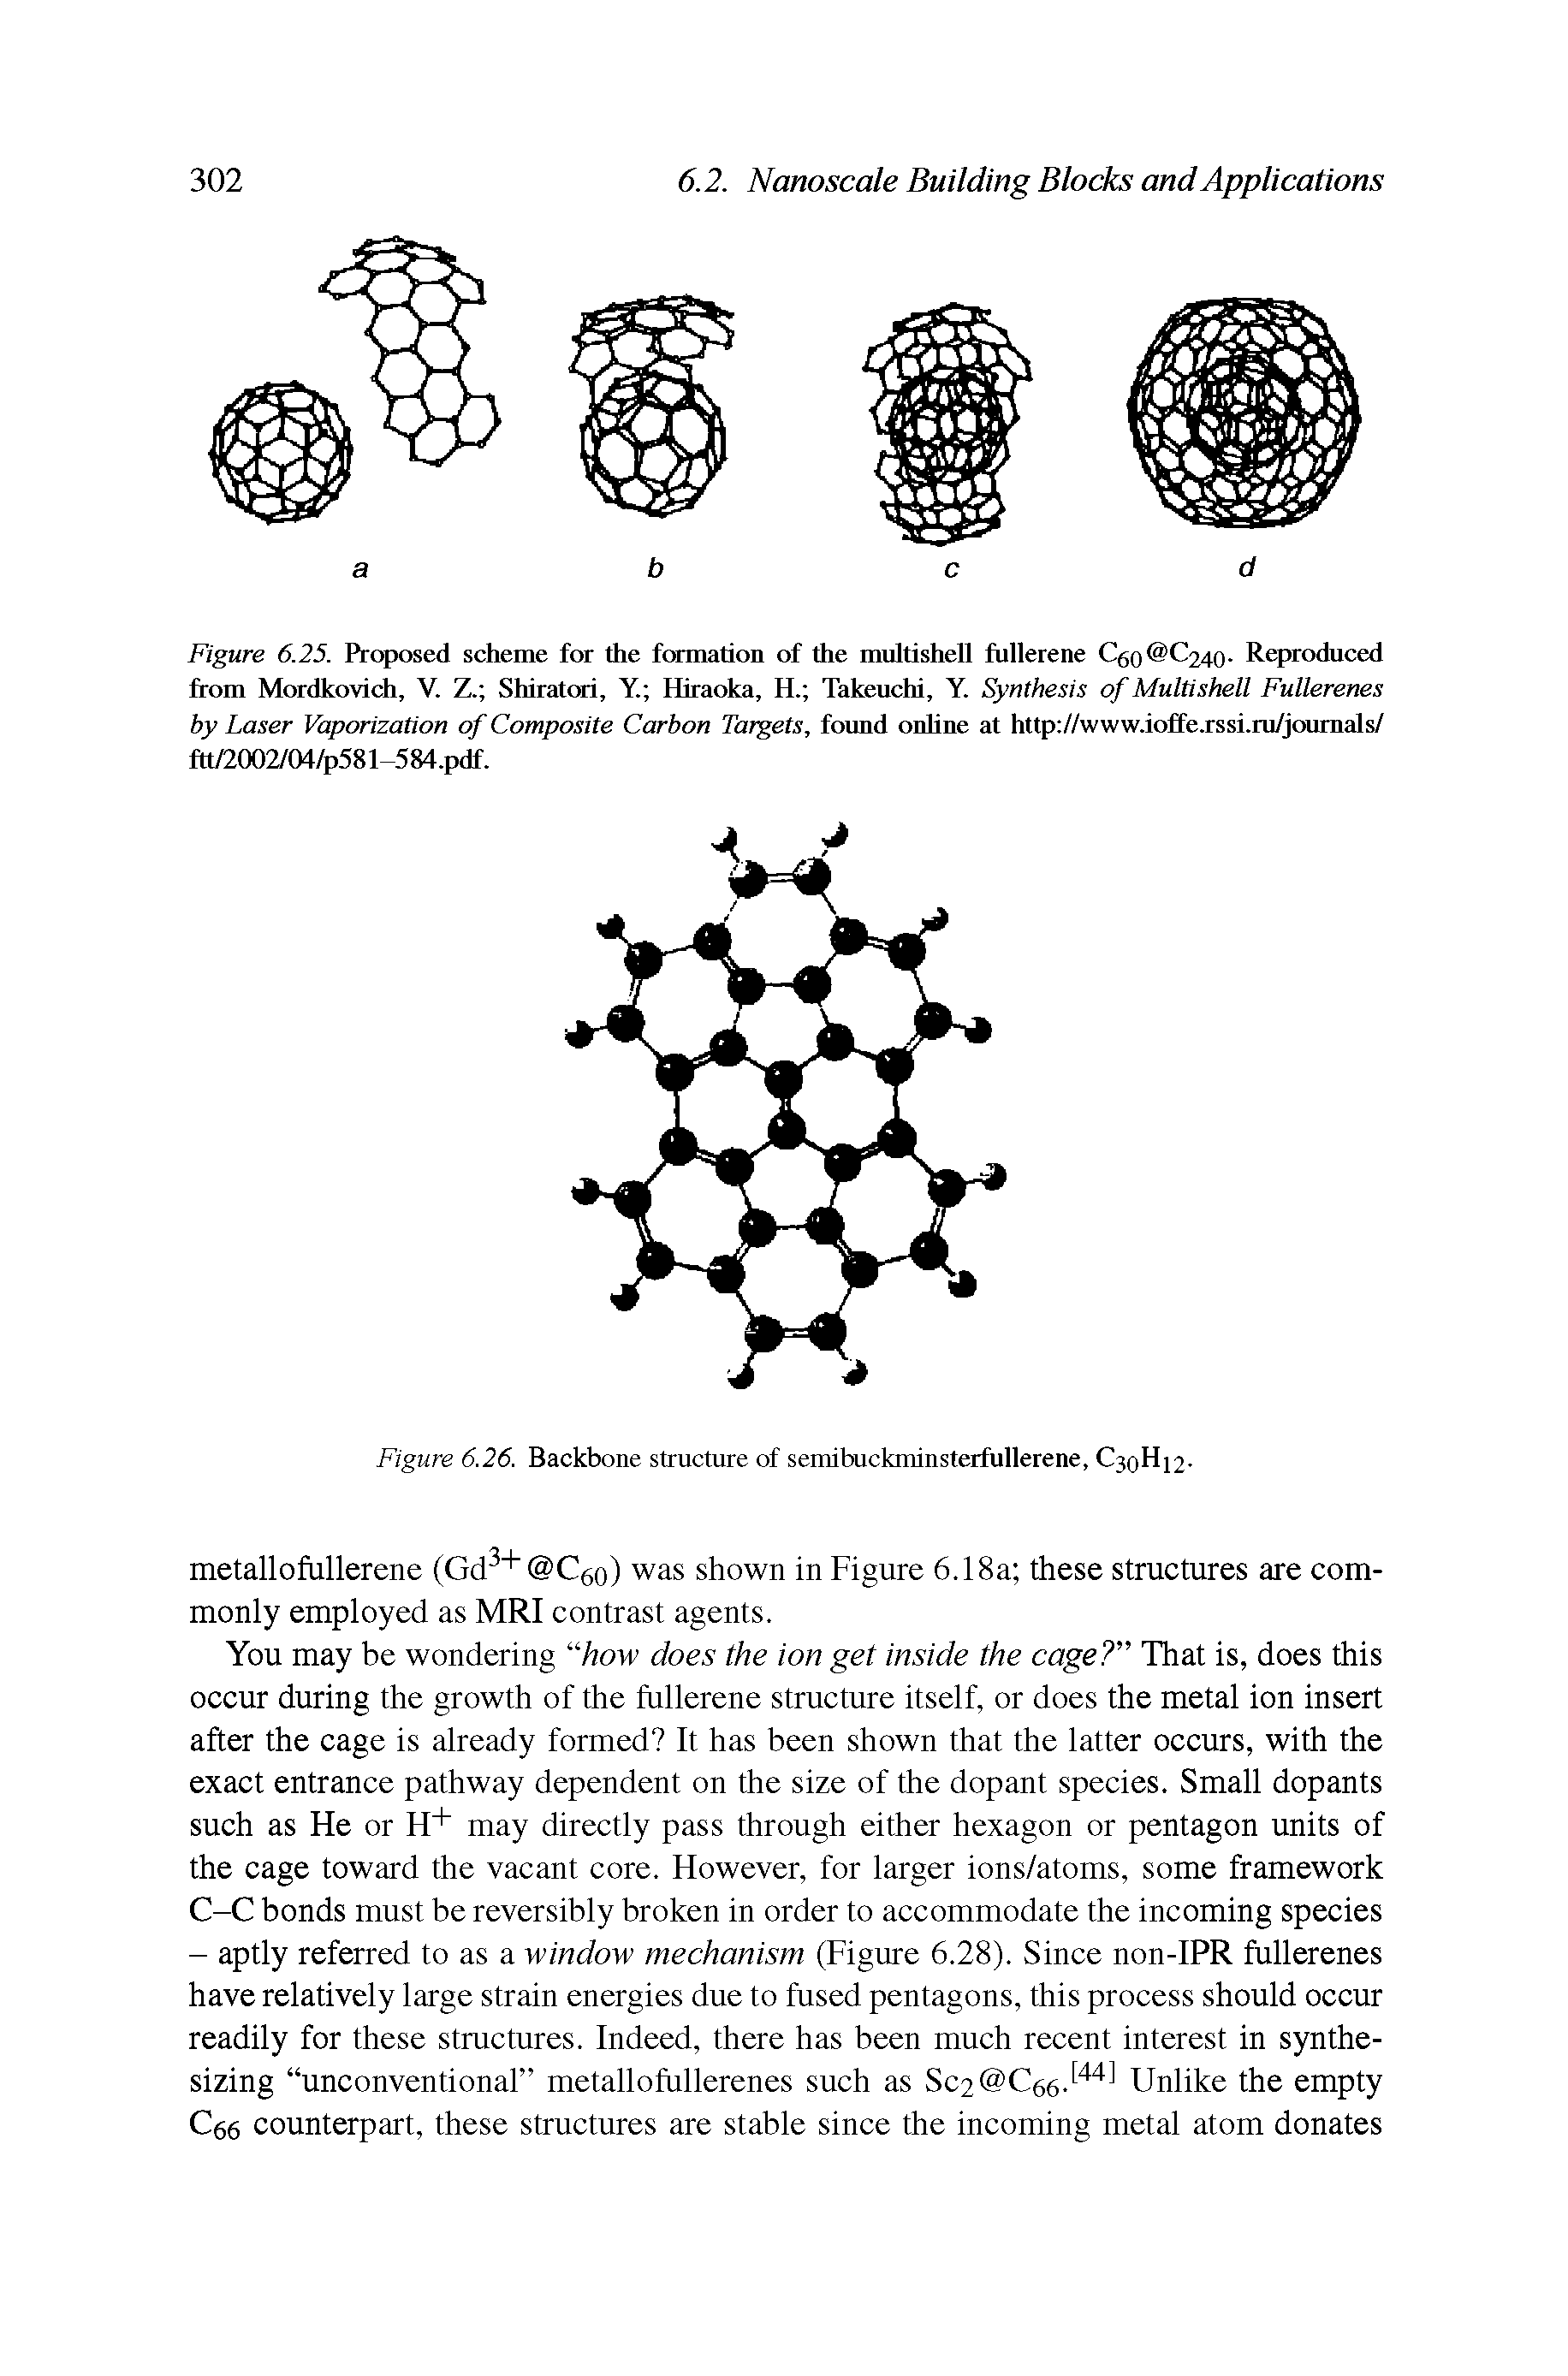 Figure 6.25. Proposed scheme for the formation of the multishell fullerene C6o C24o- Reproduced from Mordkovich, V. Z. Shiratori, Y Hiraoka, H. Takeuchi, Y. Synthesis of Multishell Fullerenes by Laser Vaporization of Composite Carbon Targets, found onhne at http //www.ioffe.rssi.ru/joumals/ ftt/2002/04/p581-584.pdf.